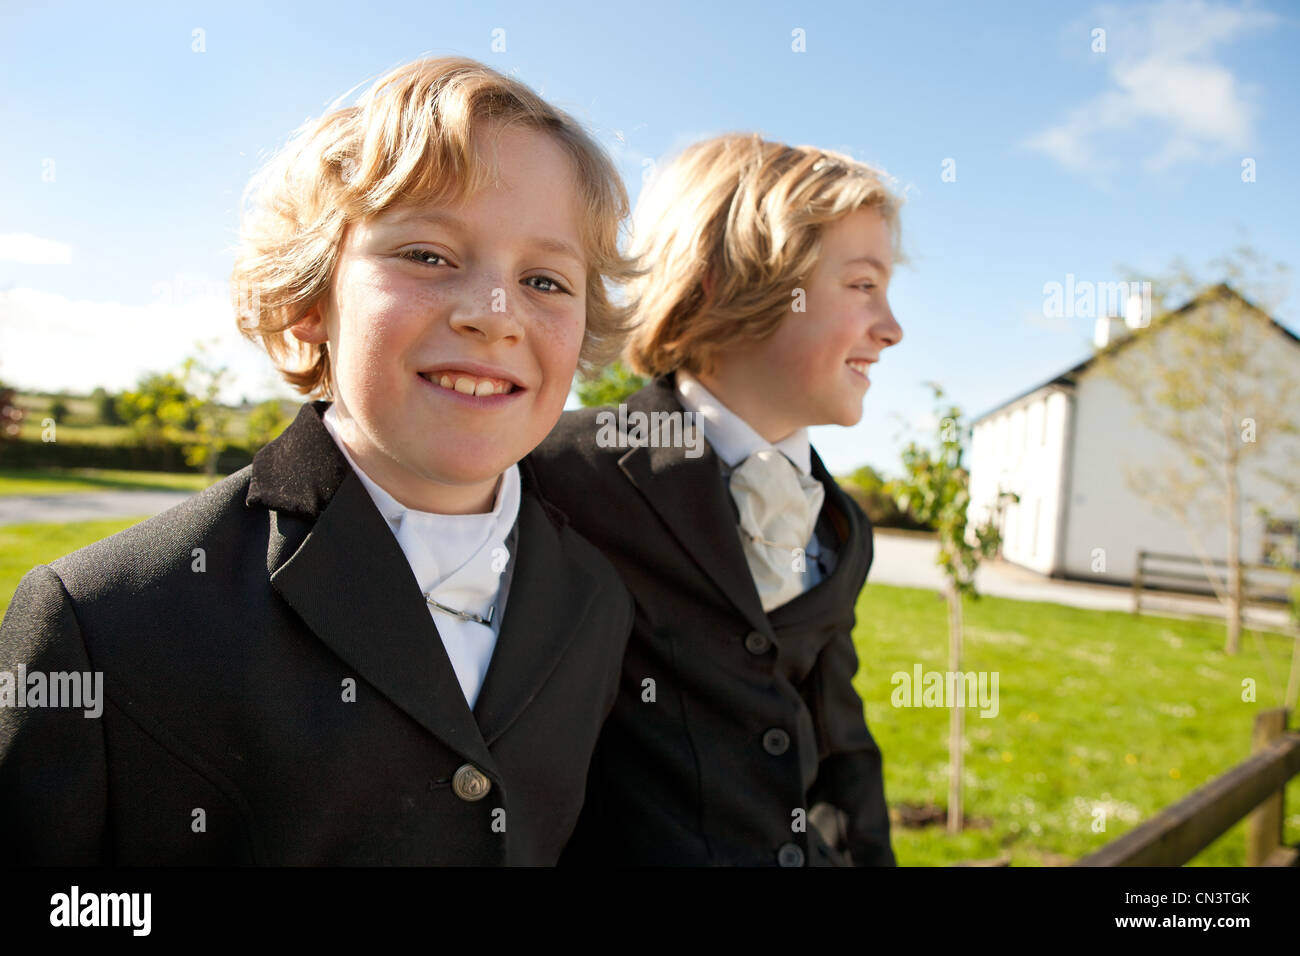 Boys wearing horse riding clothes, smiling Stock Photo